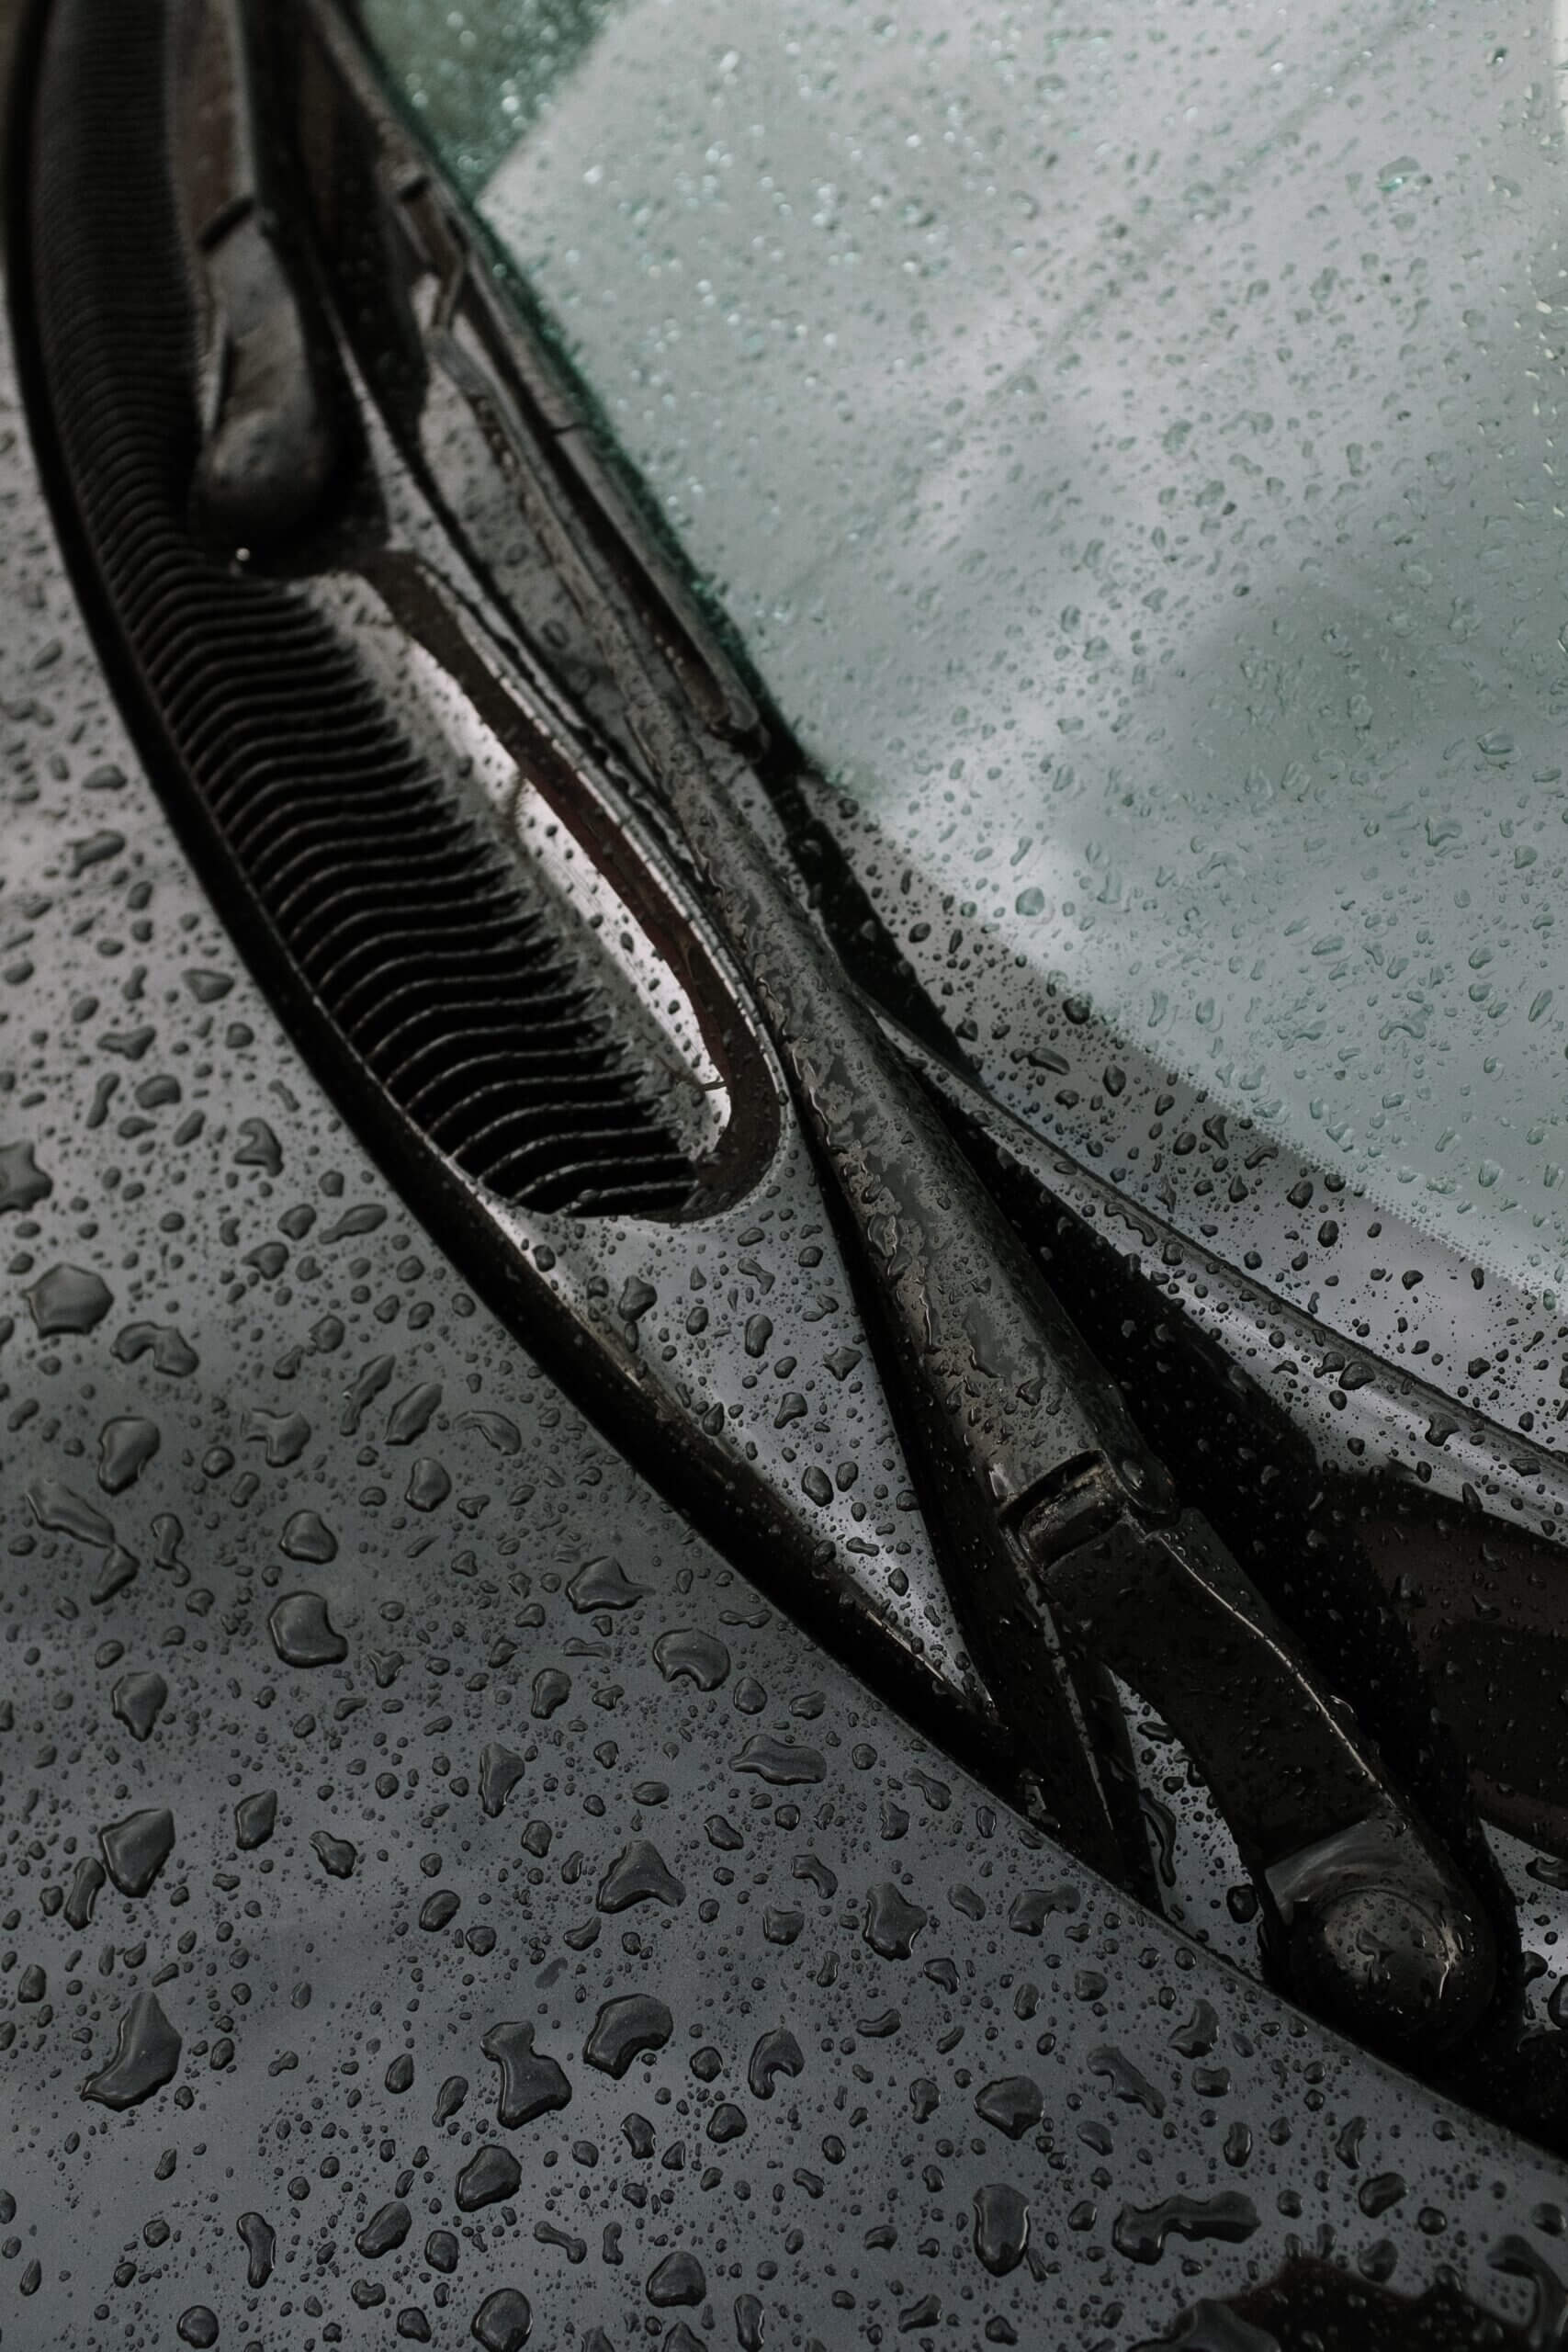 Black car with raindrops and windshield wiper.